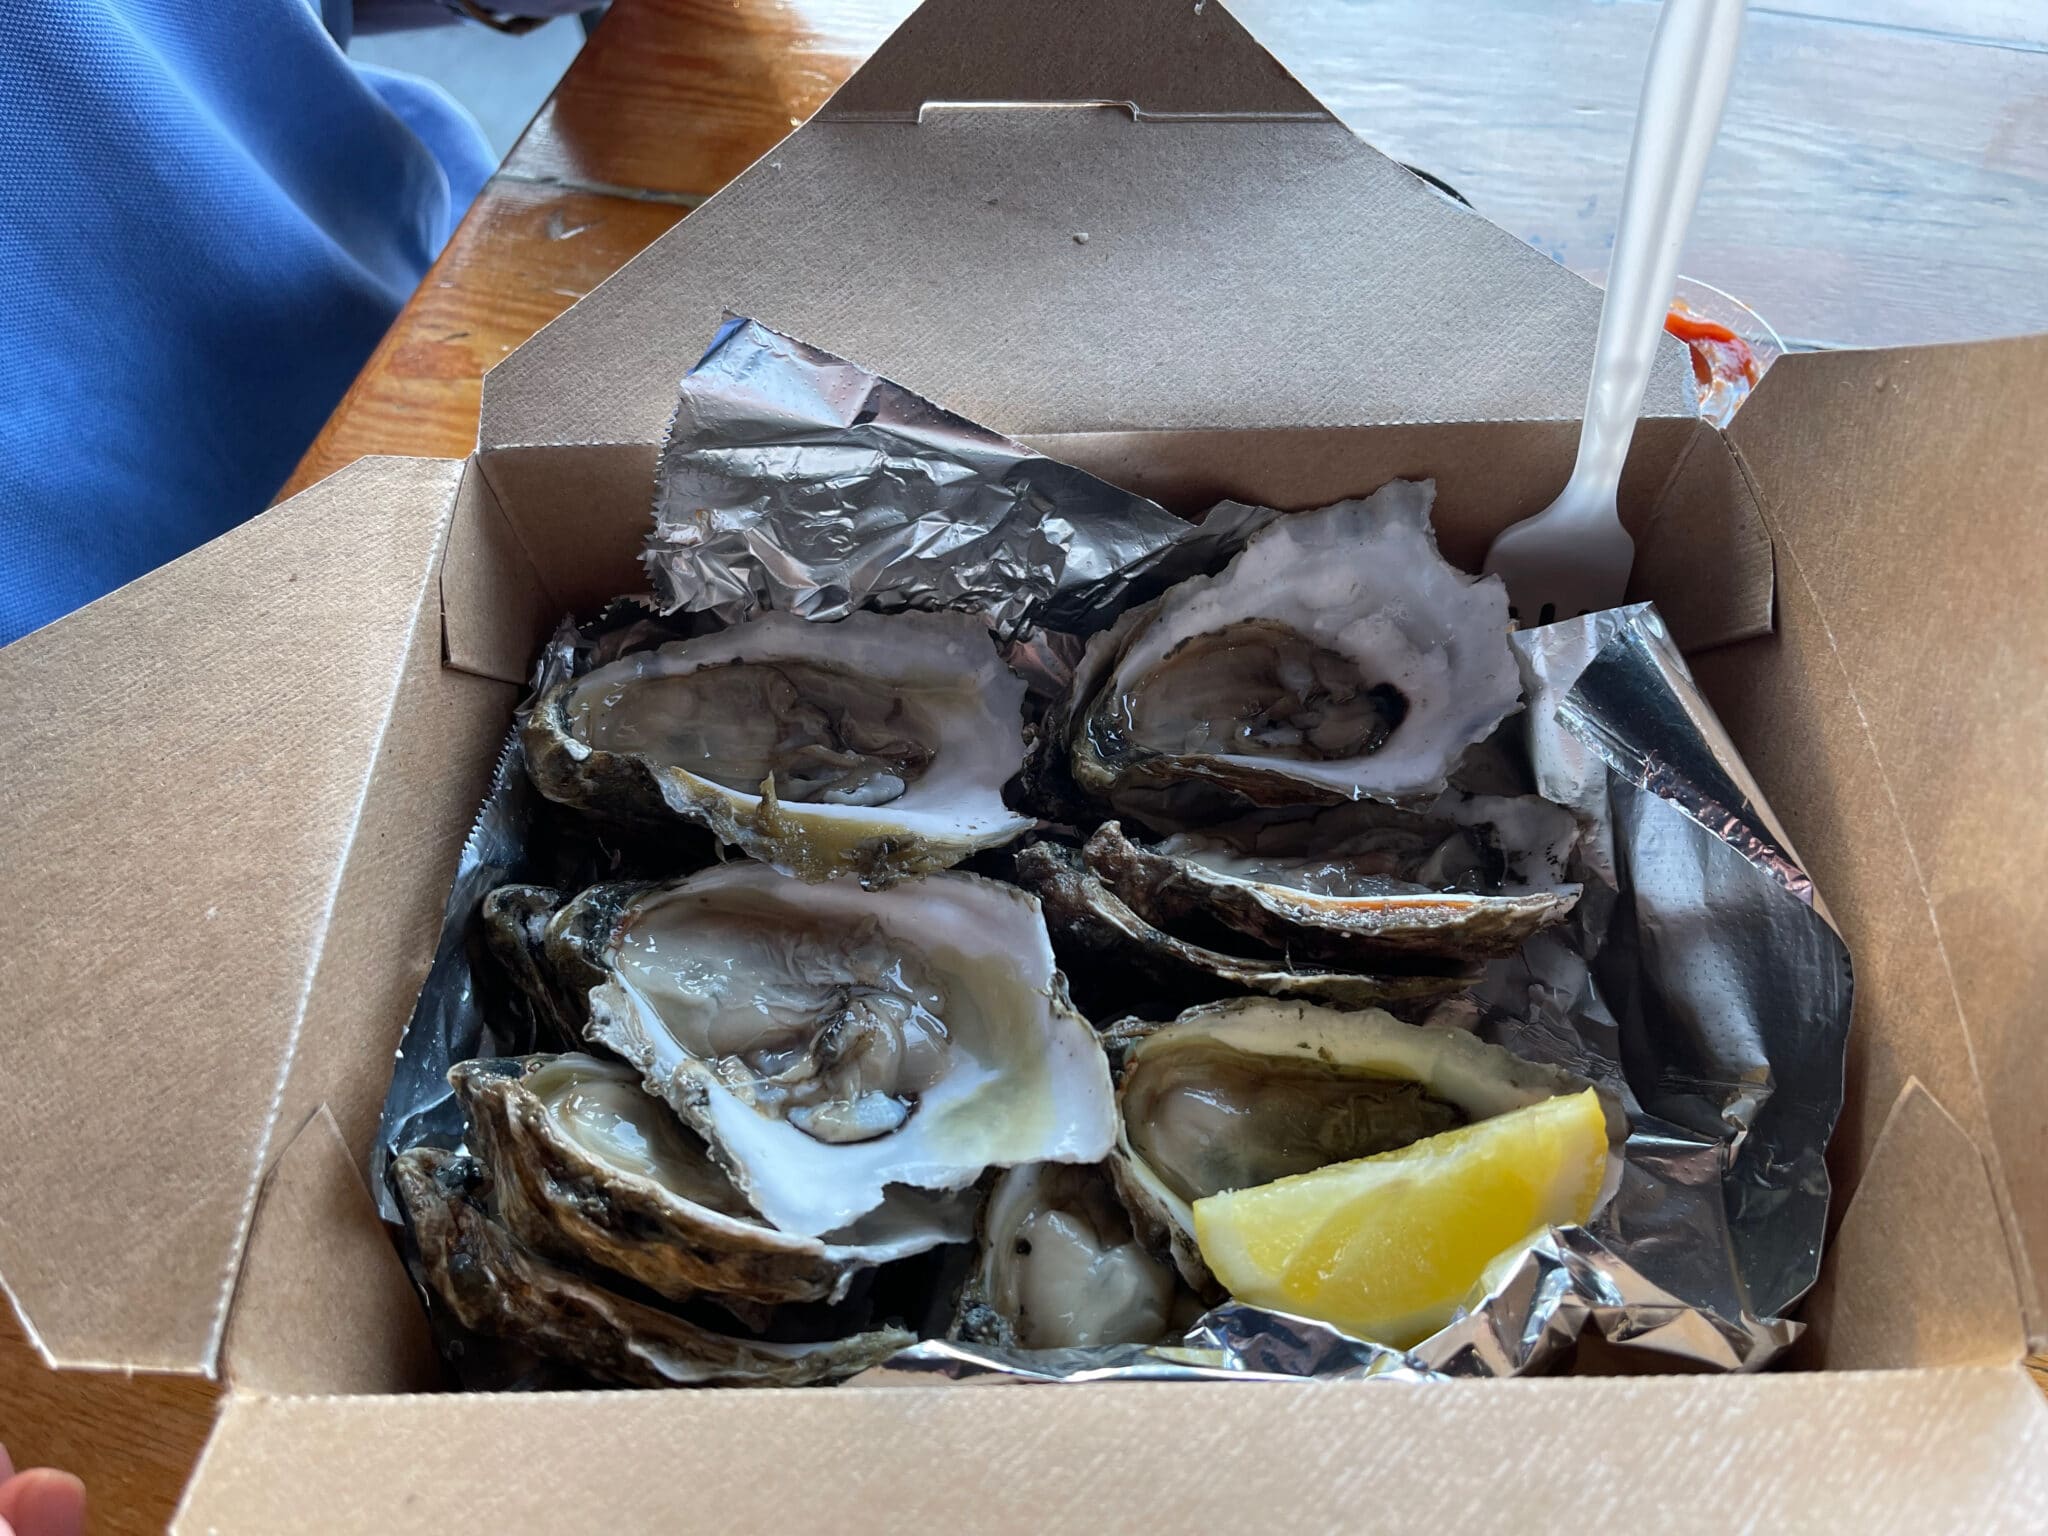 Oysters in a brown box at Don's in Chincoteague. Photo by ConsumerMojo.com